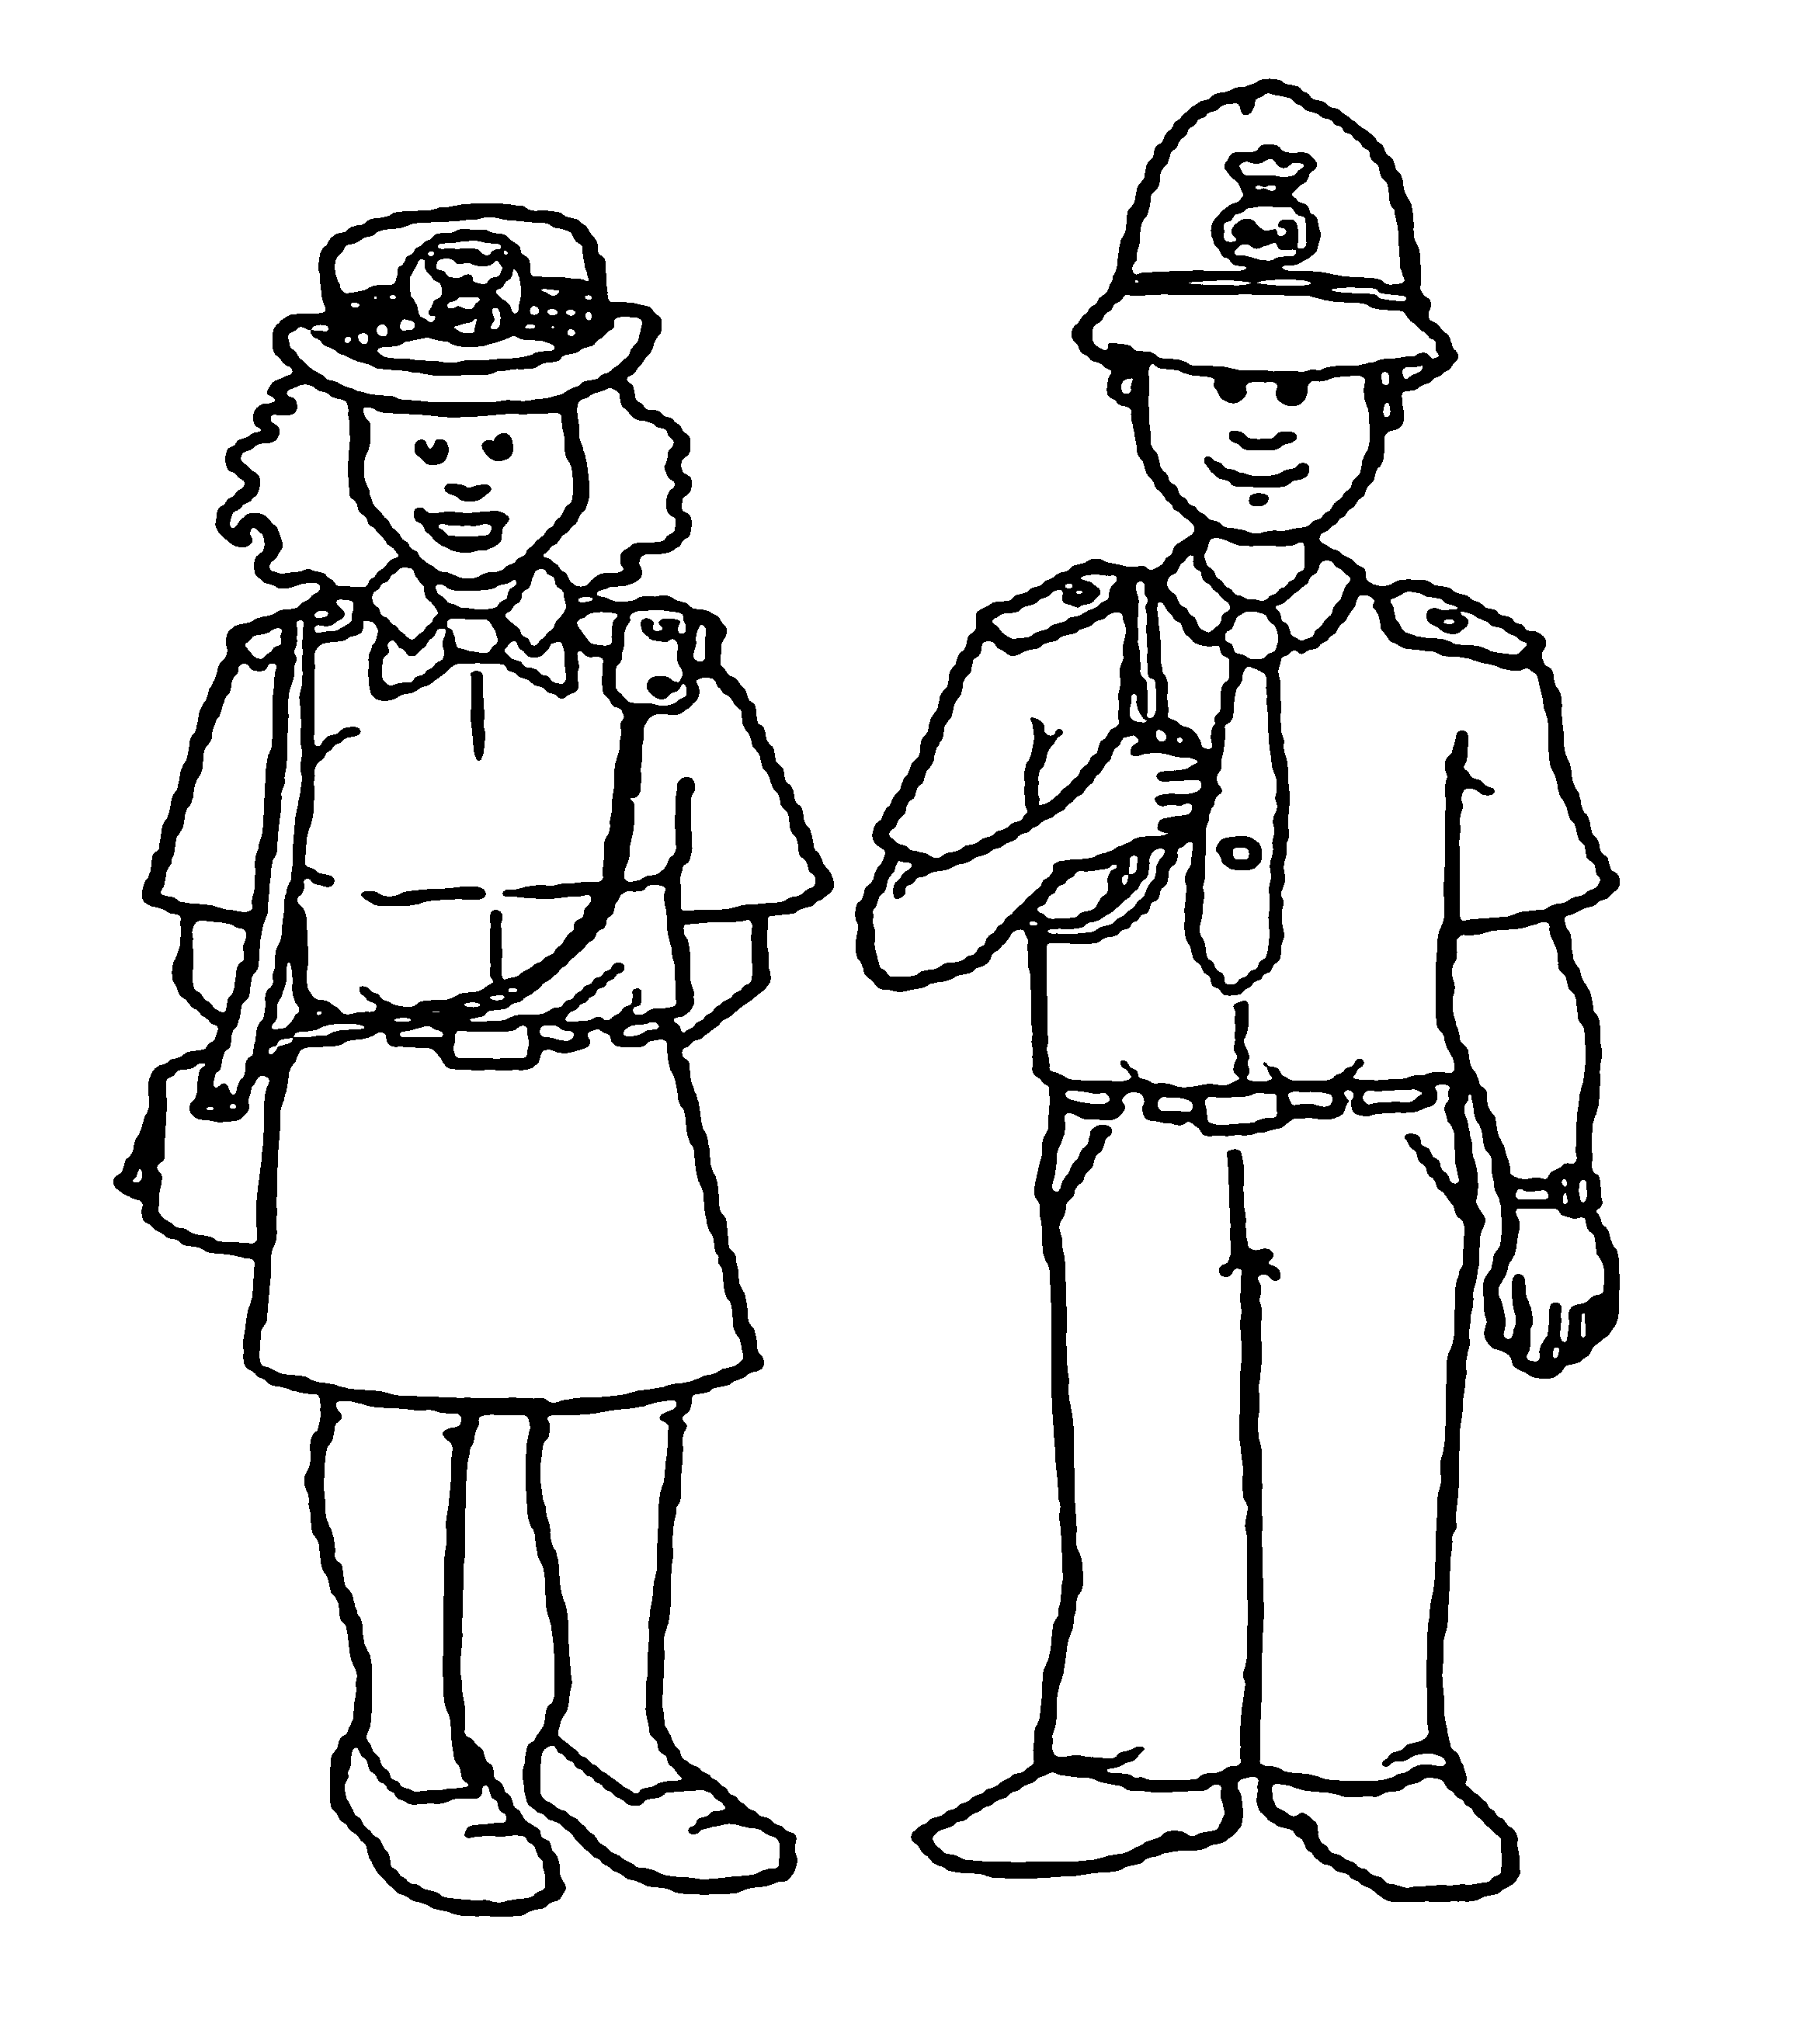  Police Coloring Pages| Coloring pages to print | Color Printing | #14